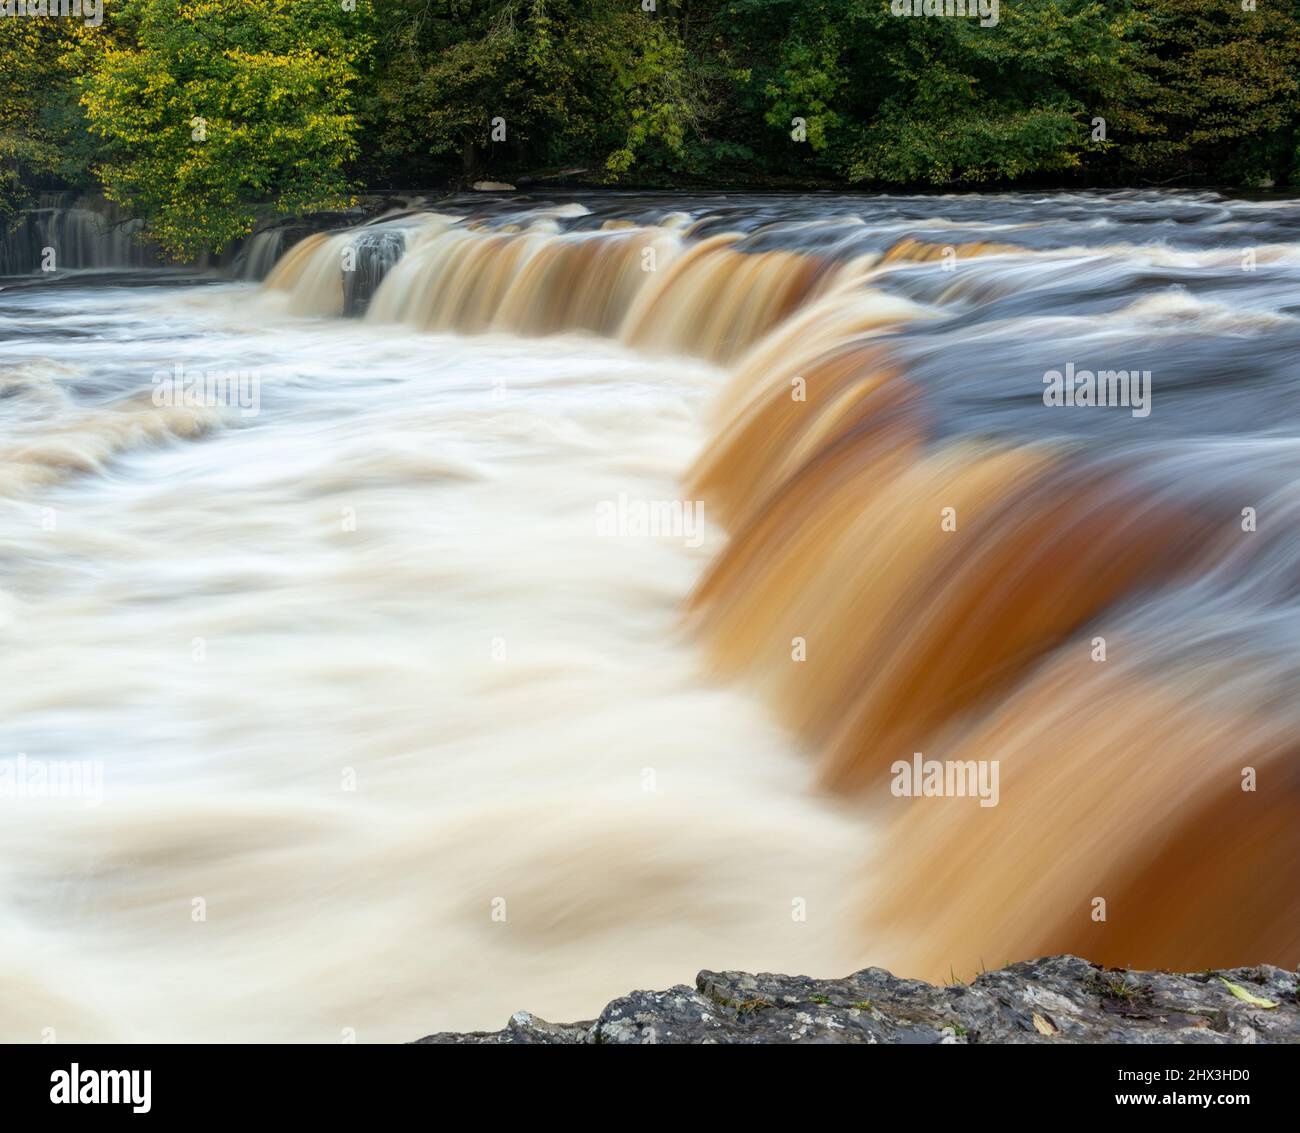 Aysgarth Upper Falls on the River Ure in Wensleydale, Yorkshire Dales National Park Stock Photo